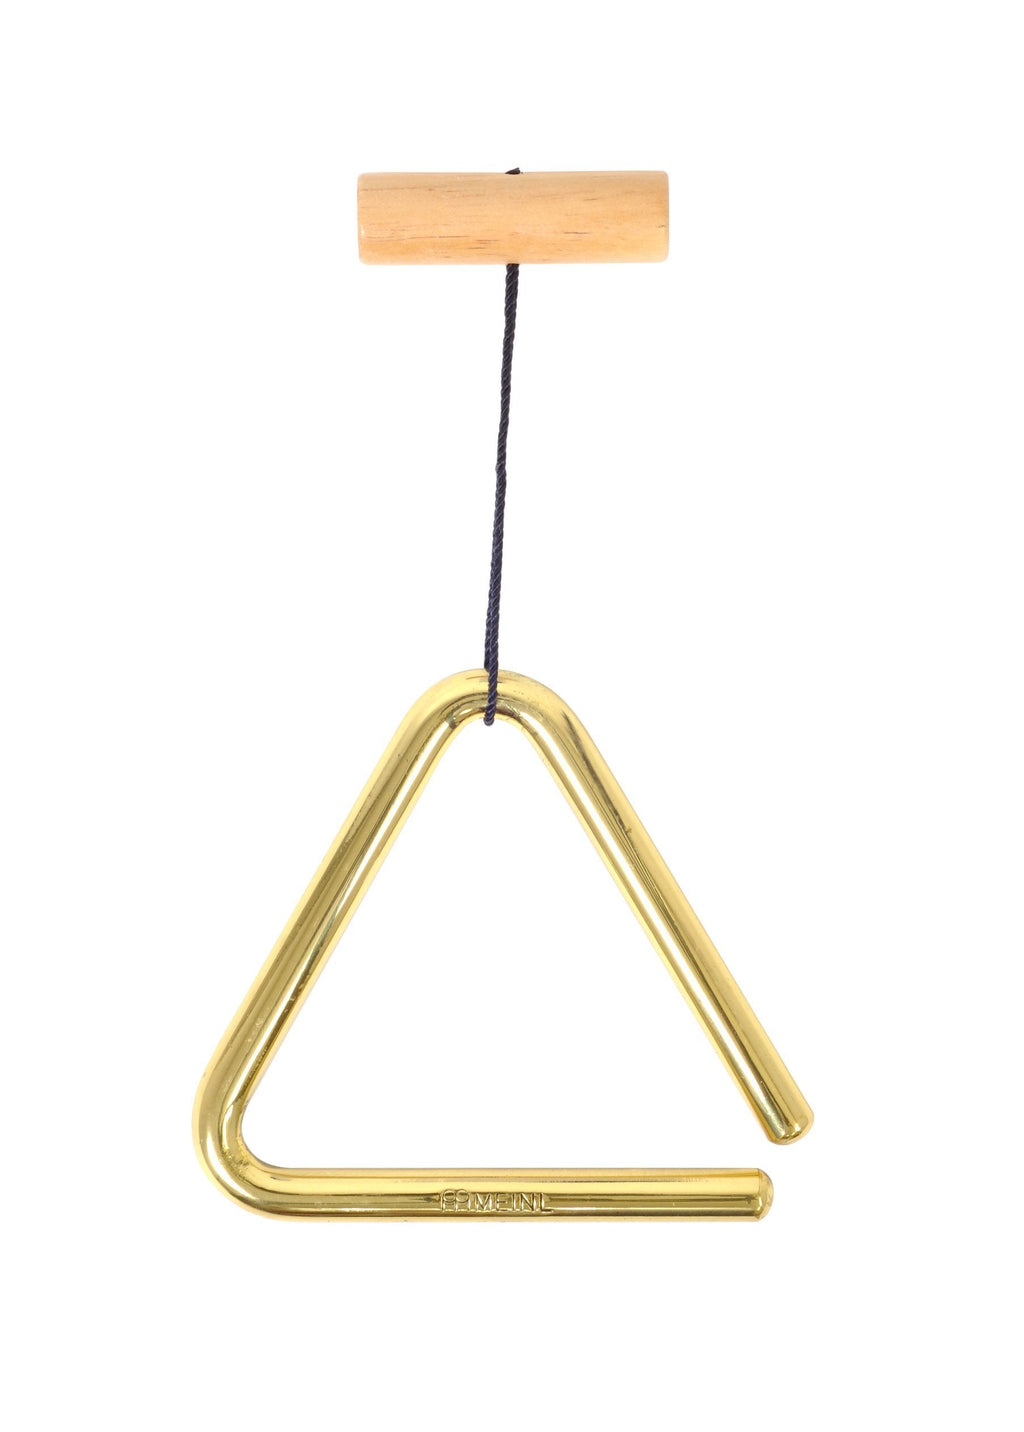 Meinl Percussion TRI10B 4-Inch Solid Brass Triangle with Metal Beater 4 Inch